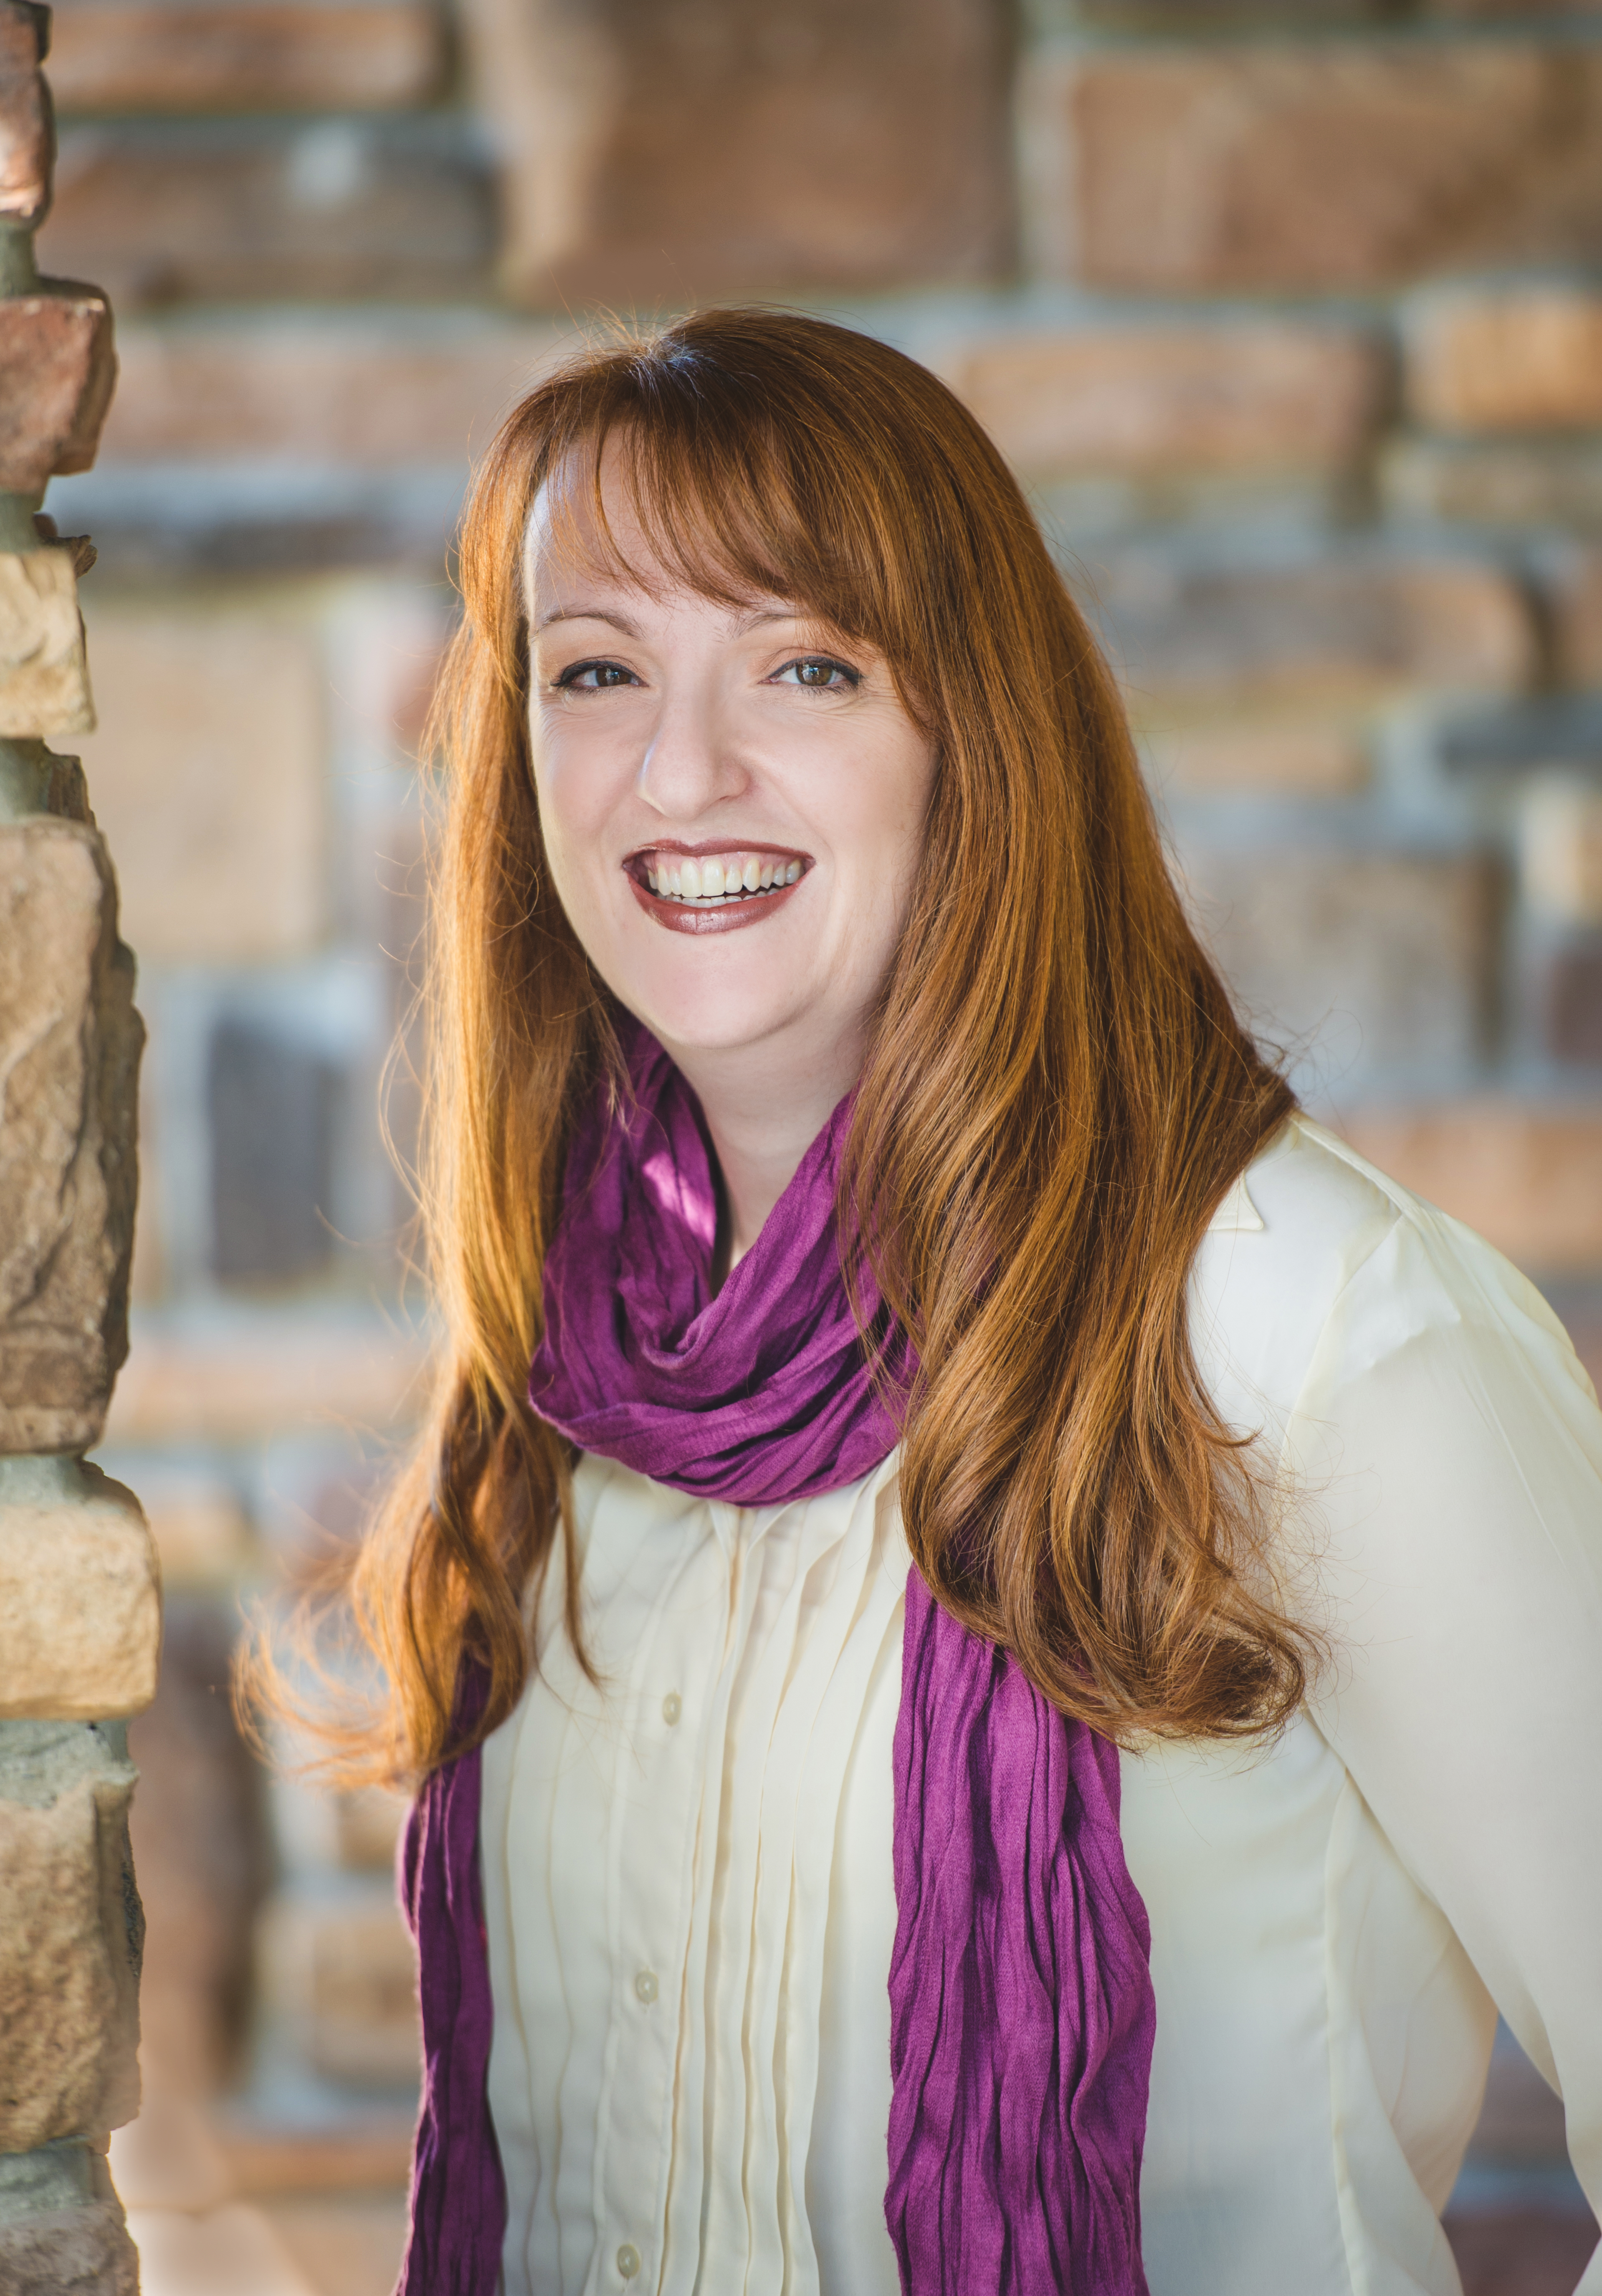 Photo is of a red-haired woman wearing a purple scarf and white blouse. 